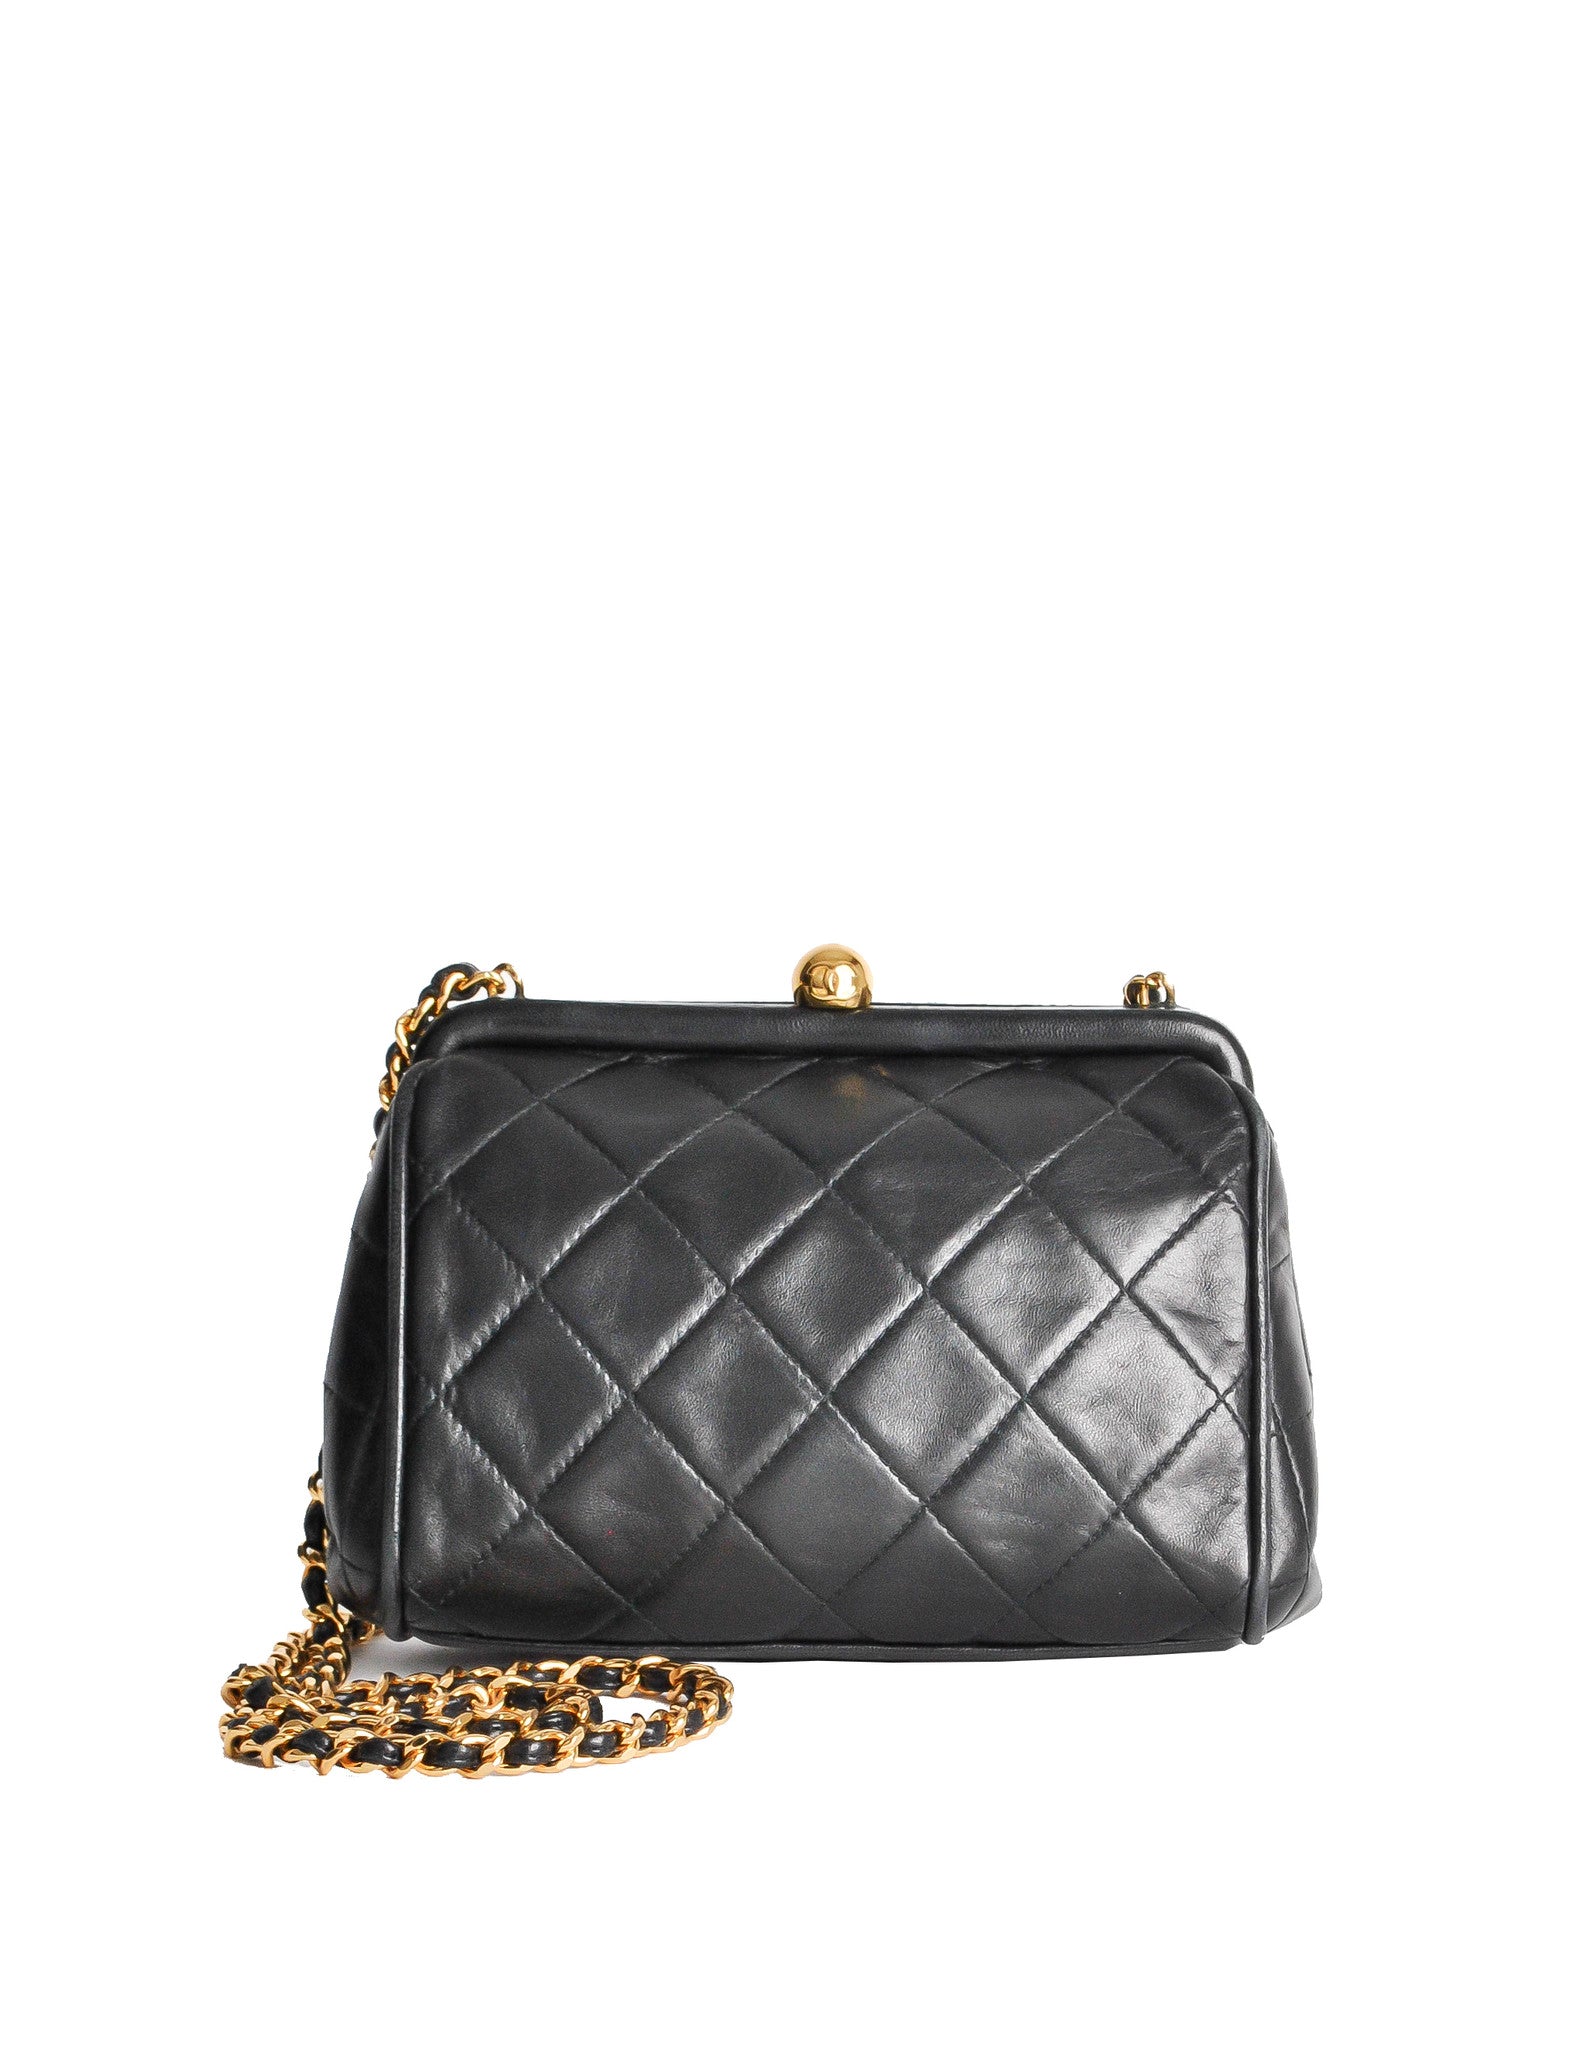 Chanel Vintage Black Quilted Crossbody Bag - from Amarcord Vintage Fashion